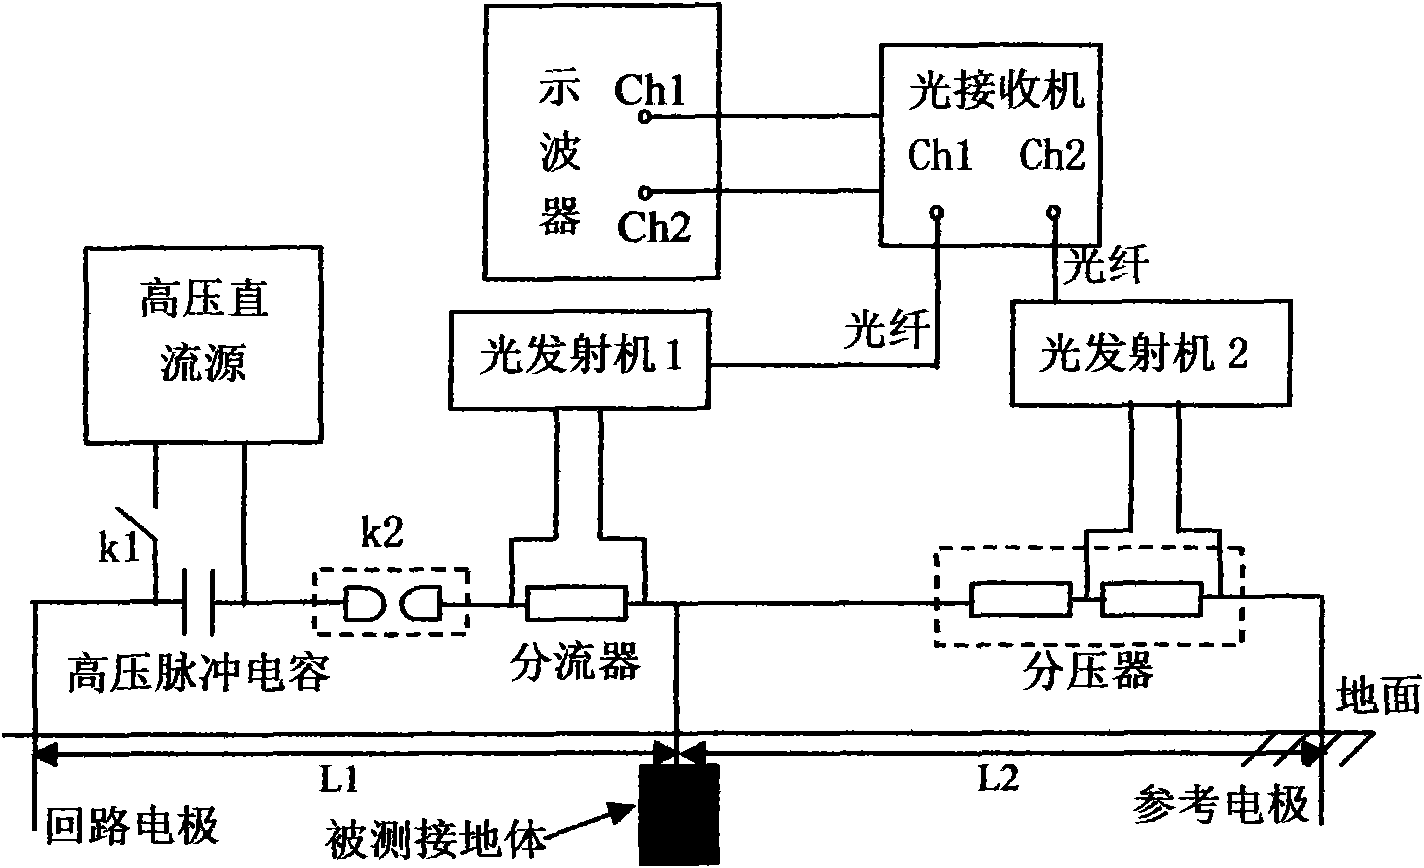 Impact grounding impedance measuring system and measuring method thereof